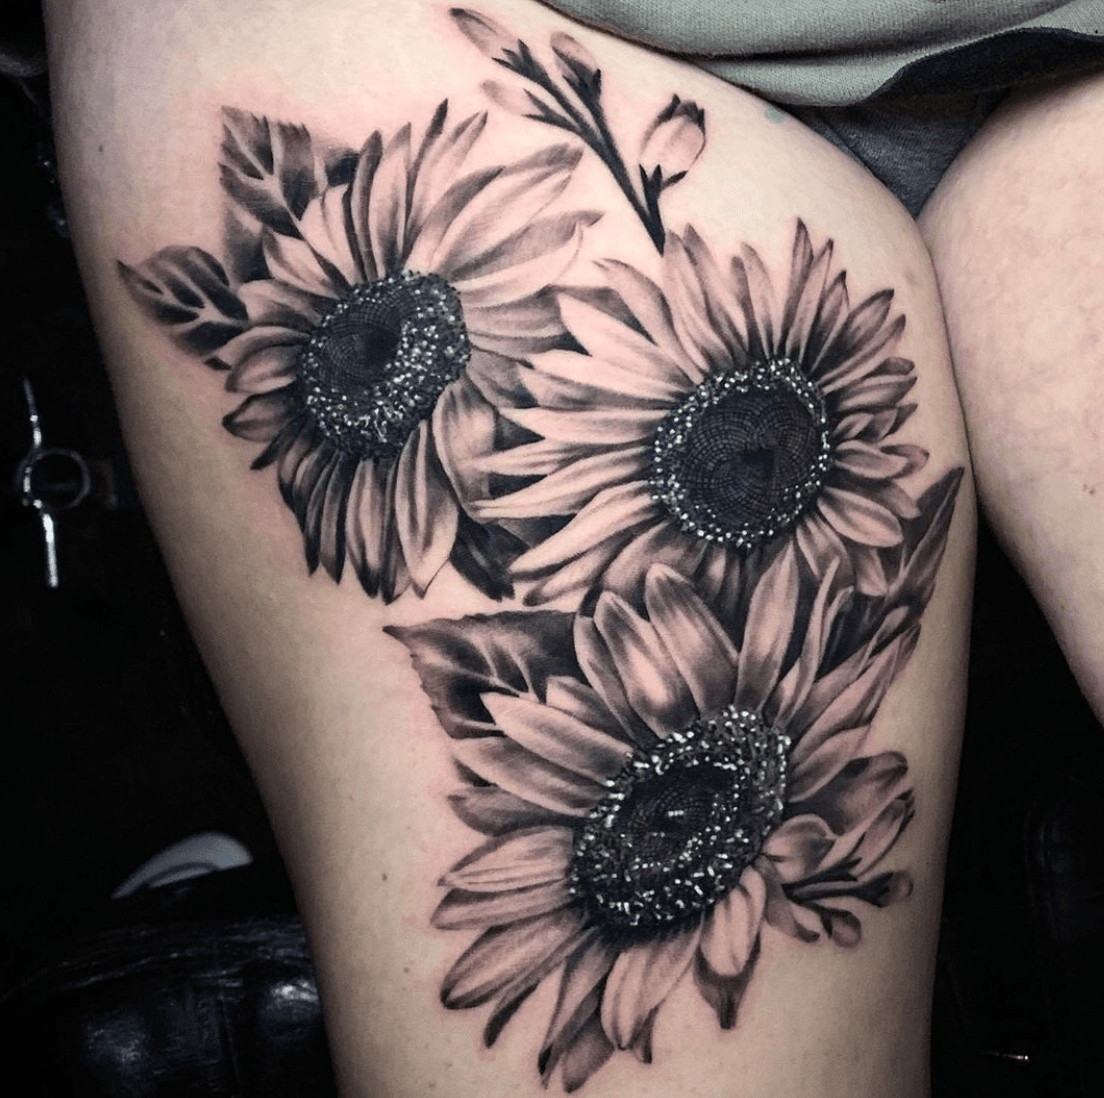 One Life Tattoo Studio  A couple nice sunflowers all healed and settled  Done at One Life Tattoo  Facebook